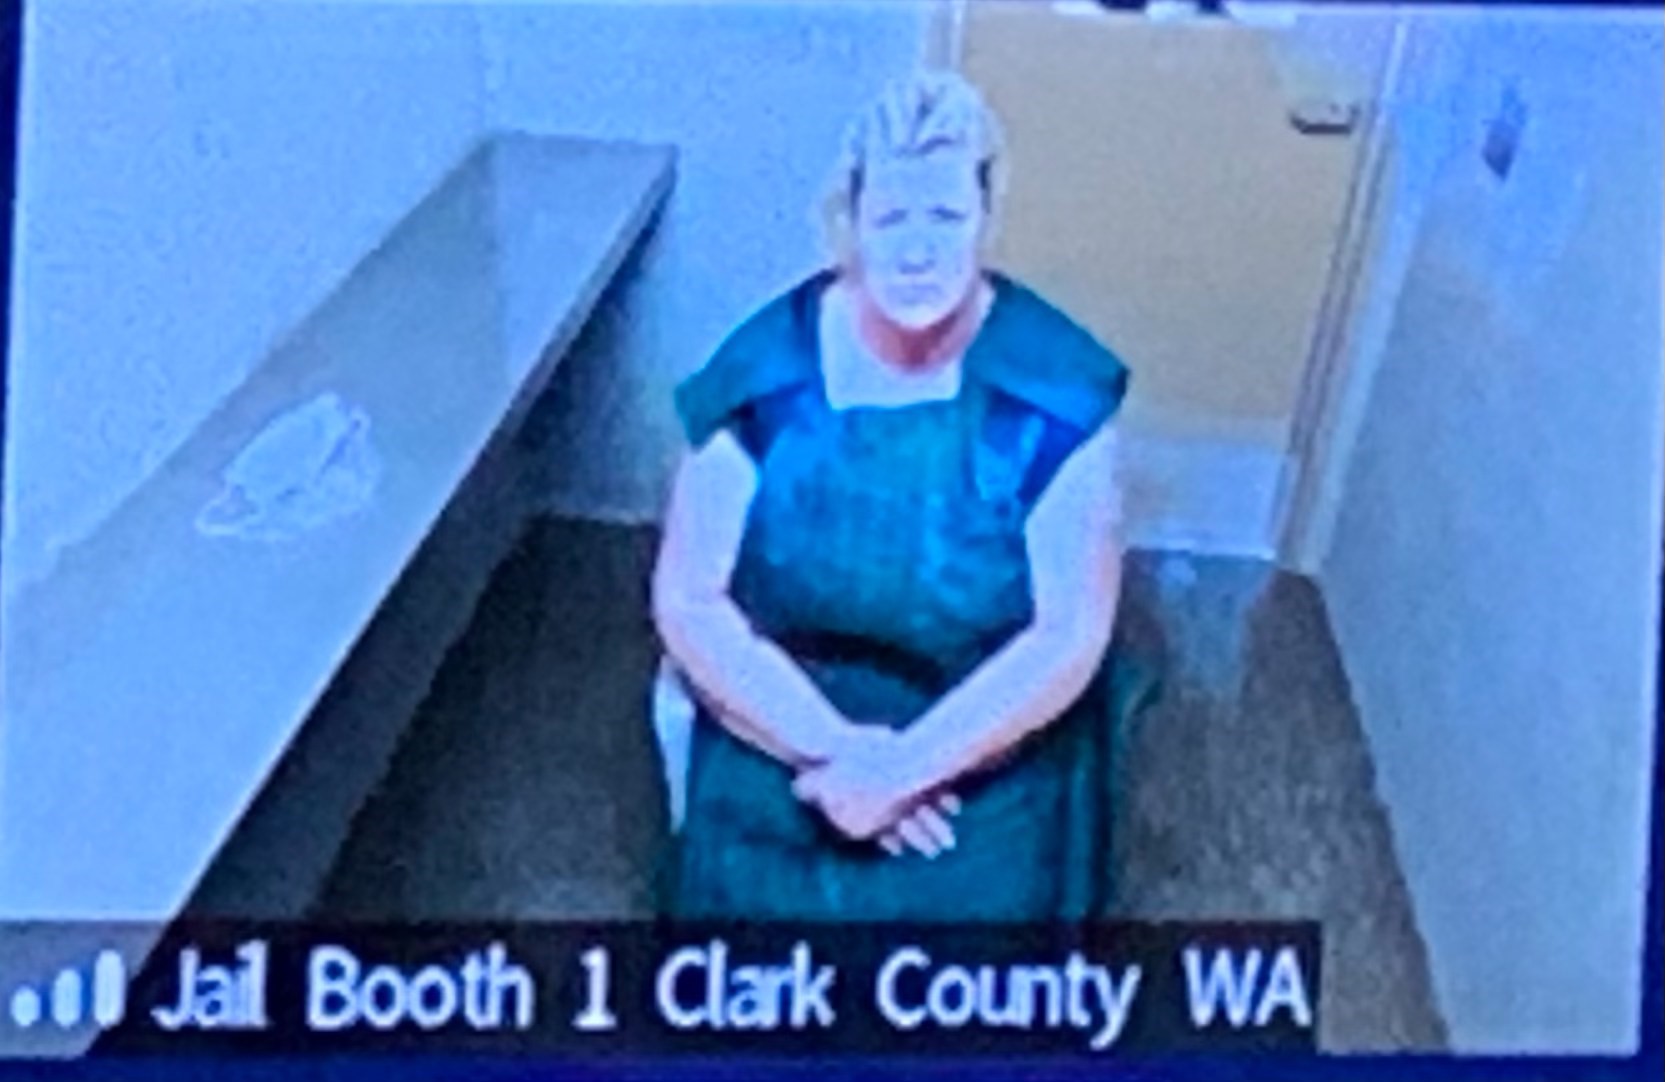 Lani Kraabell, 48, of Winlock makes a first appearance Monday morning, Sept. 13, 2021, in Clark County Superior Court on suspicion of second-degree murder, possession of a stolen firearm and second-degree unlawful possession of a firearm. She is accused of facilitating the sale of stolen firearms linked to an undercover investigation that led to the fatal shooting of Clark County sheriff's Detective Jeremy Brown.